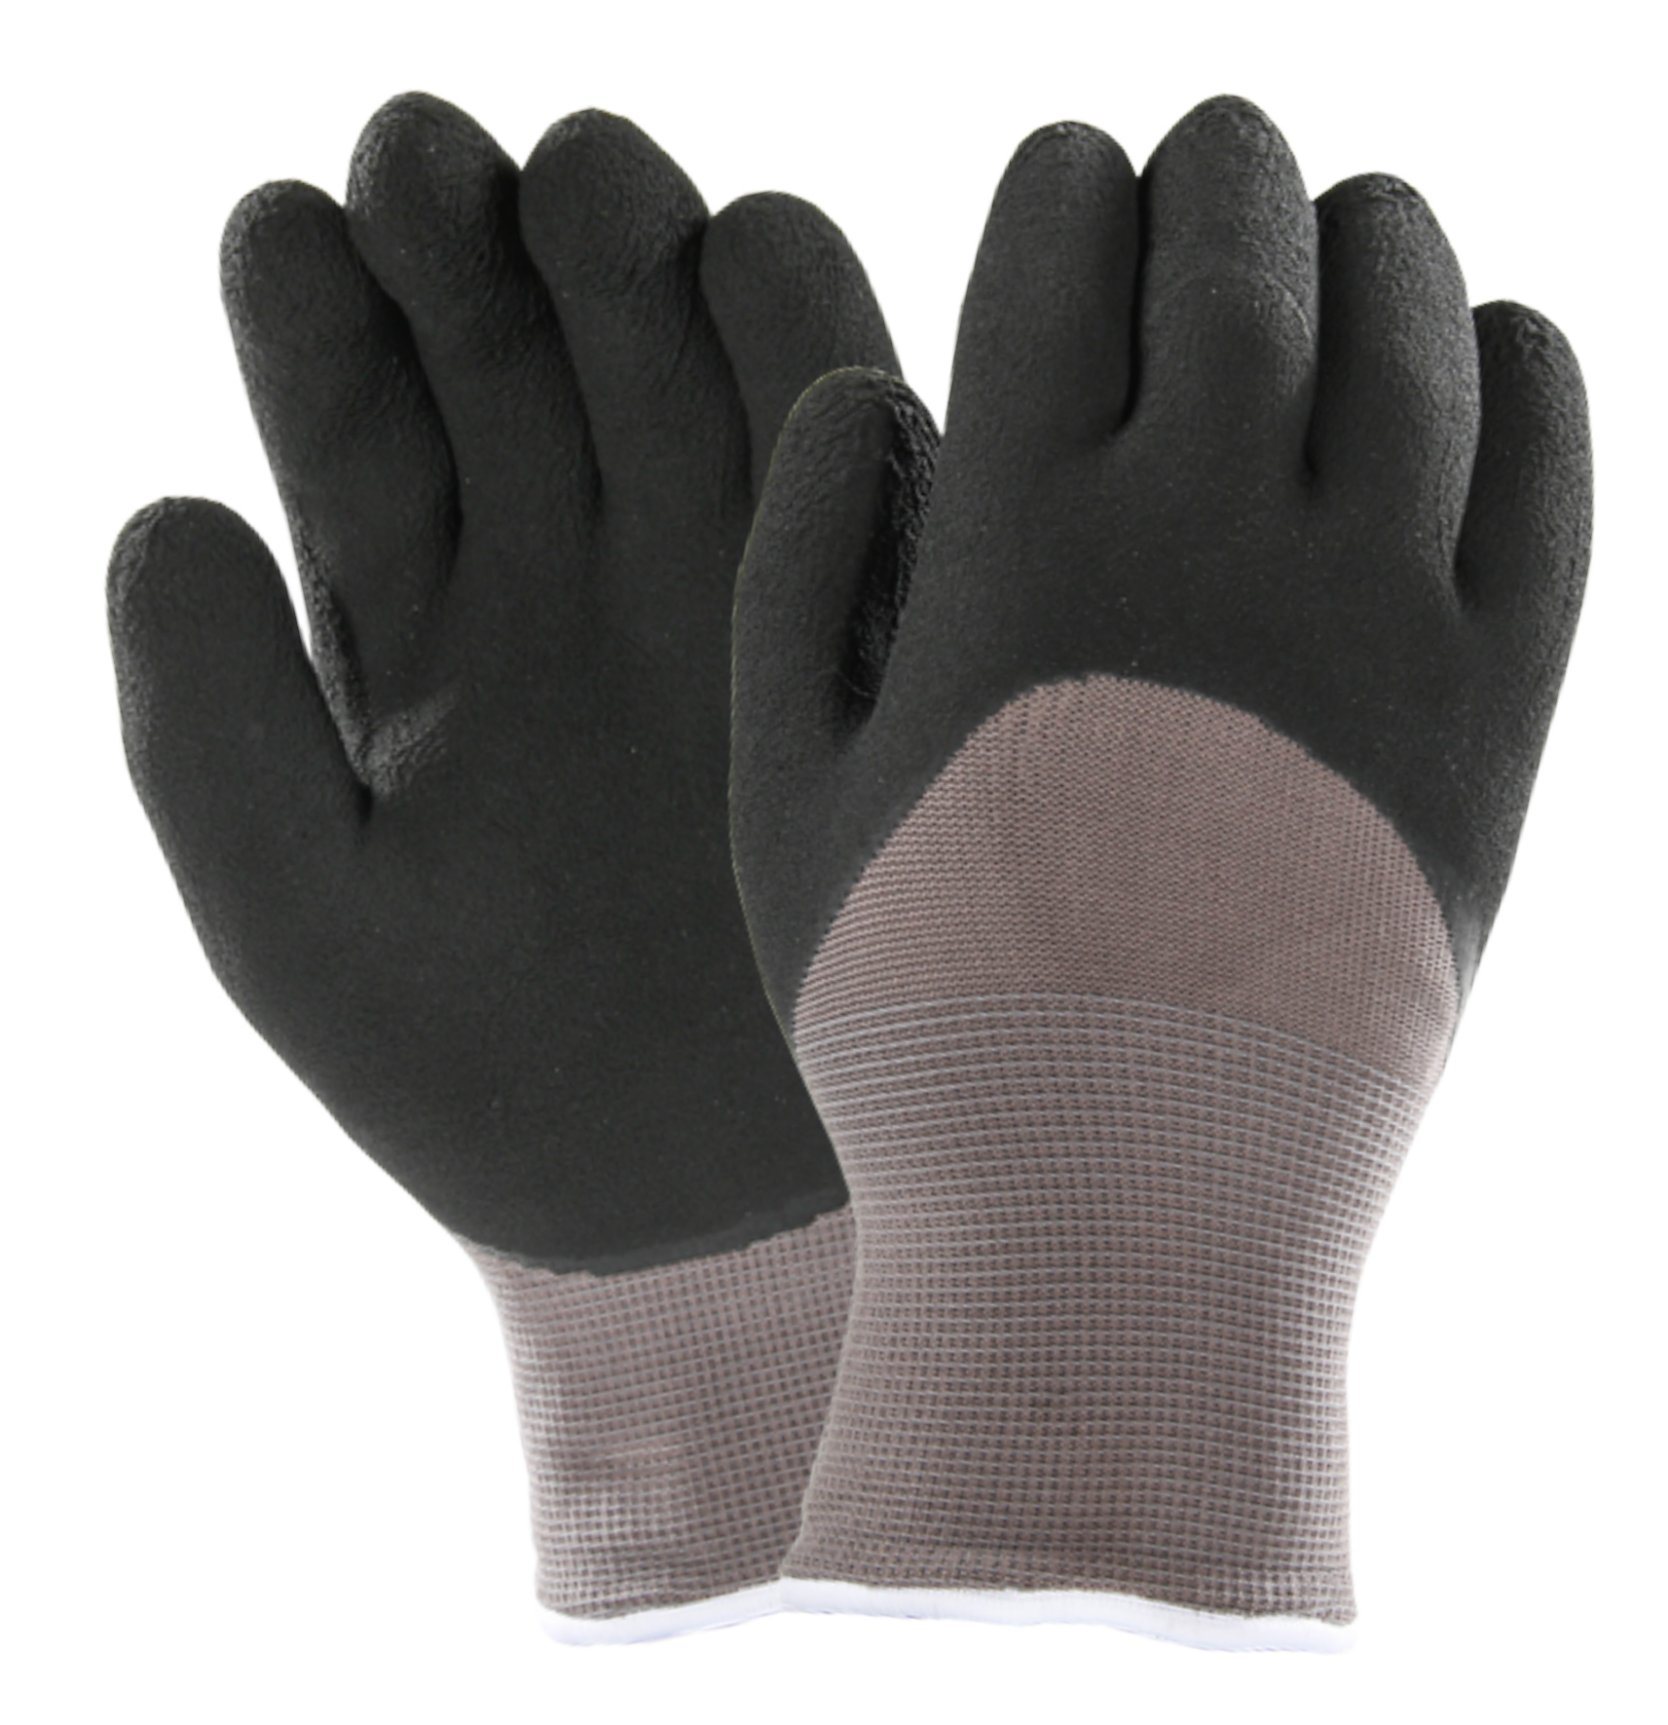 Seamless Liner Cold-Proof Winter Work Gloves with Latex Coating